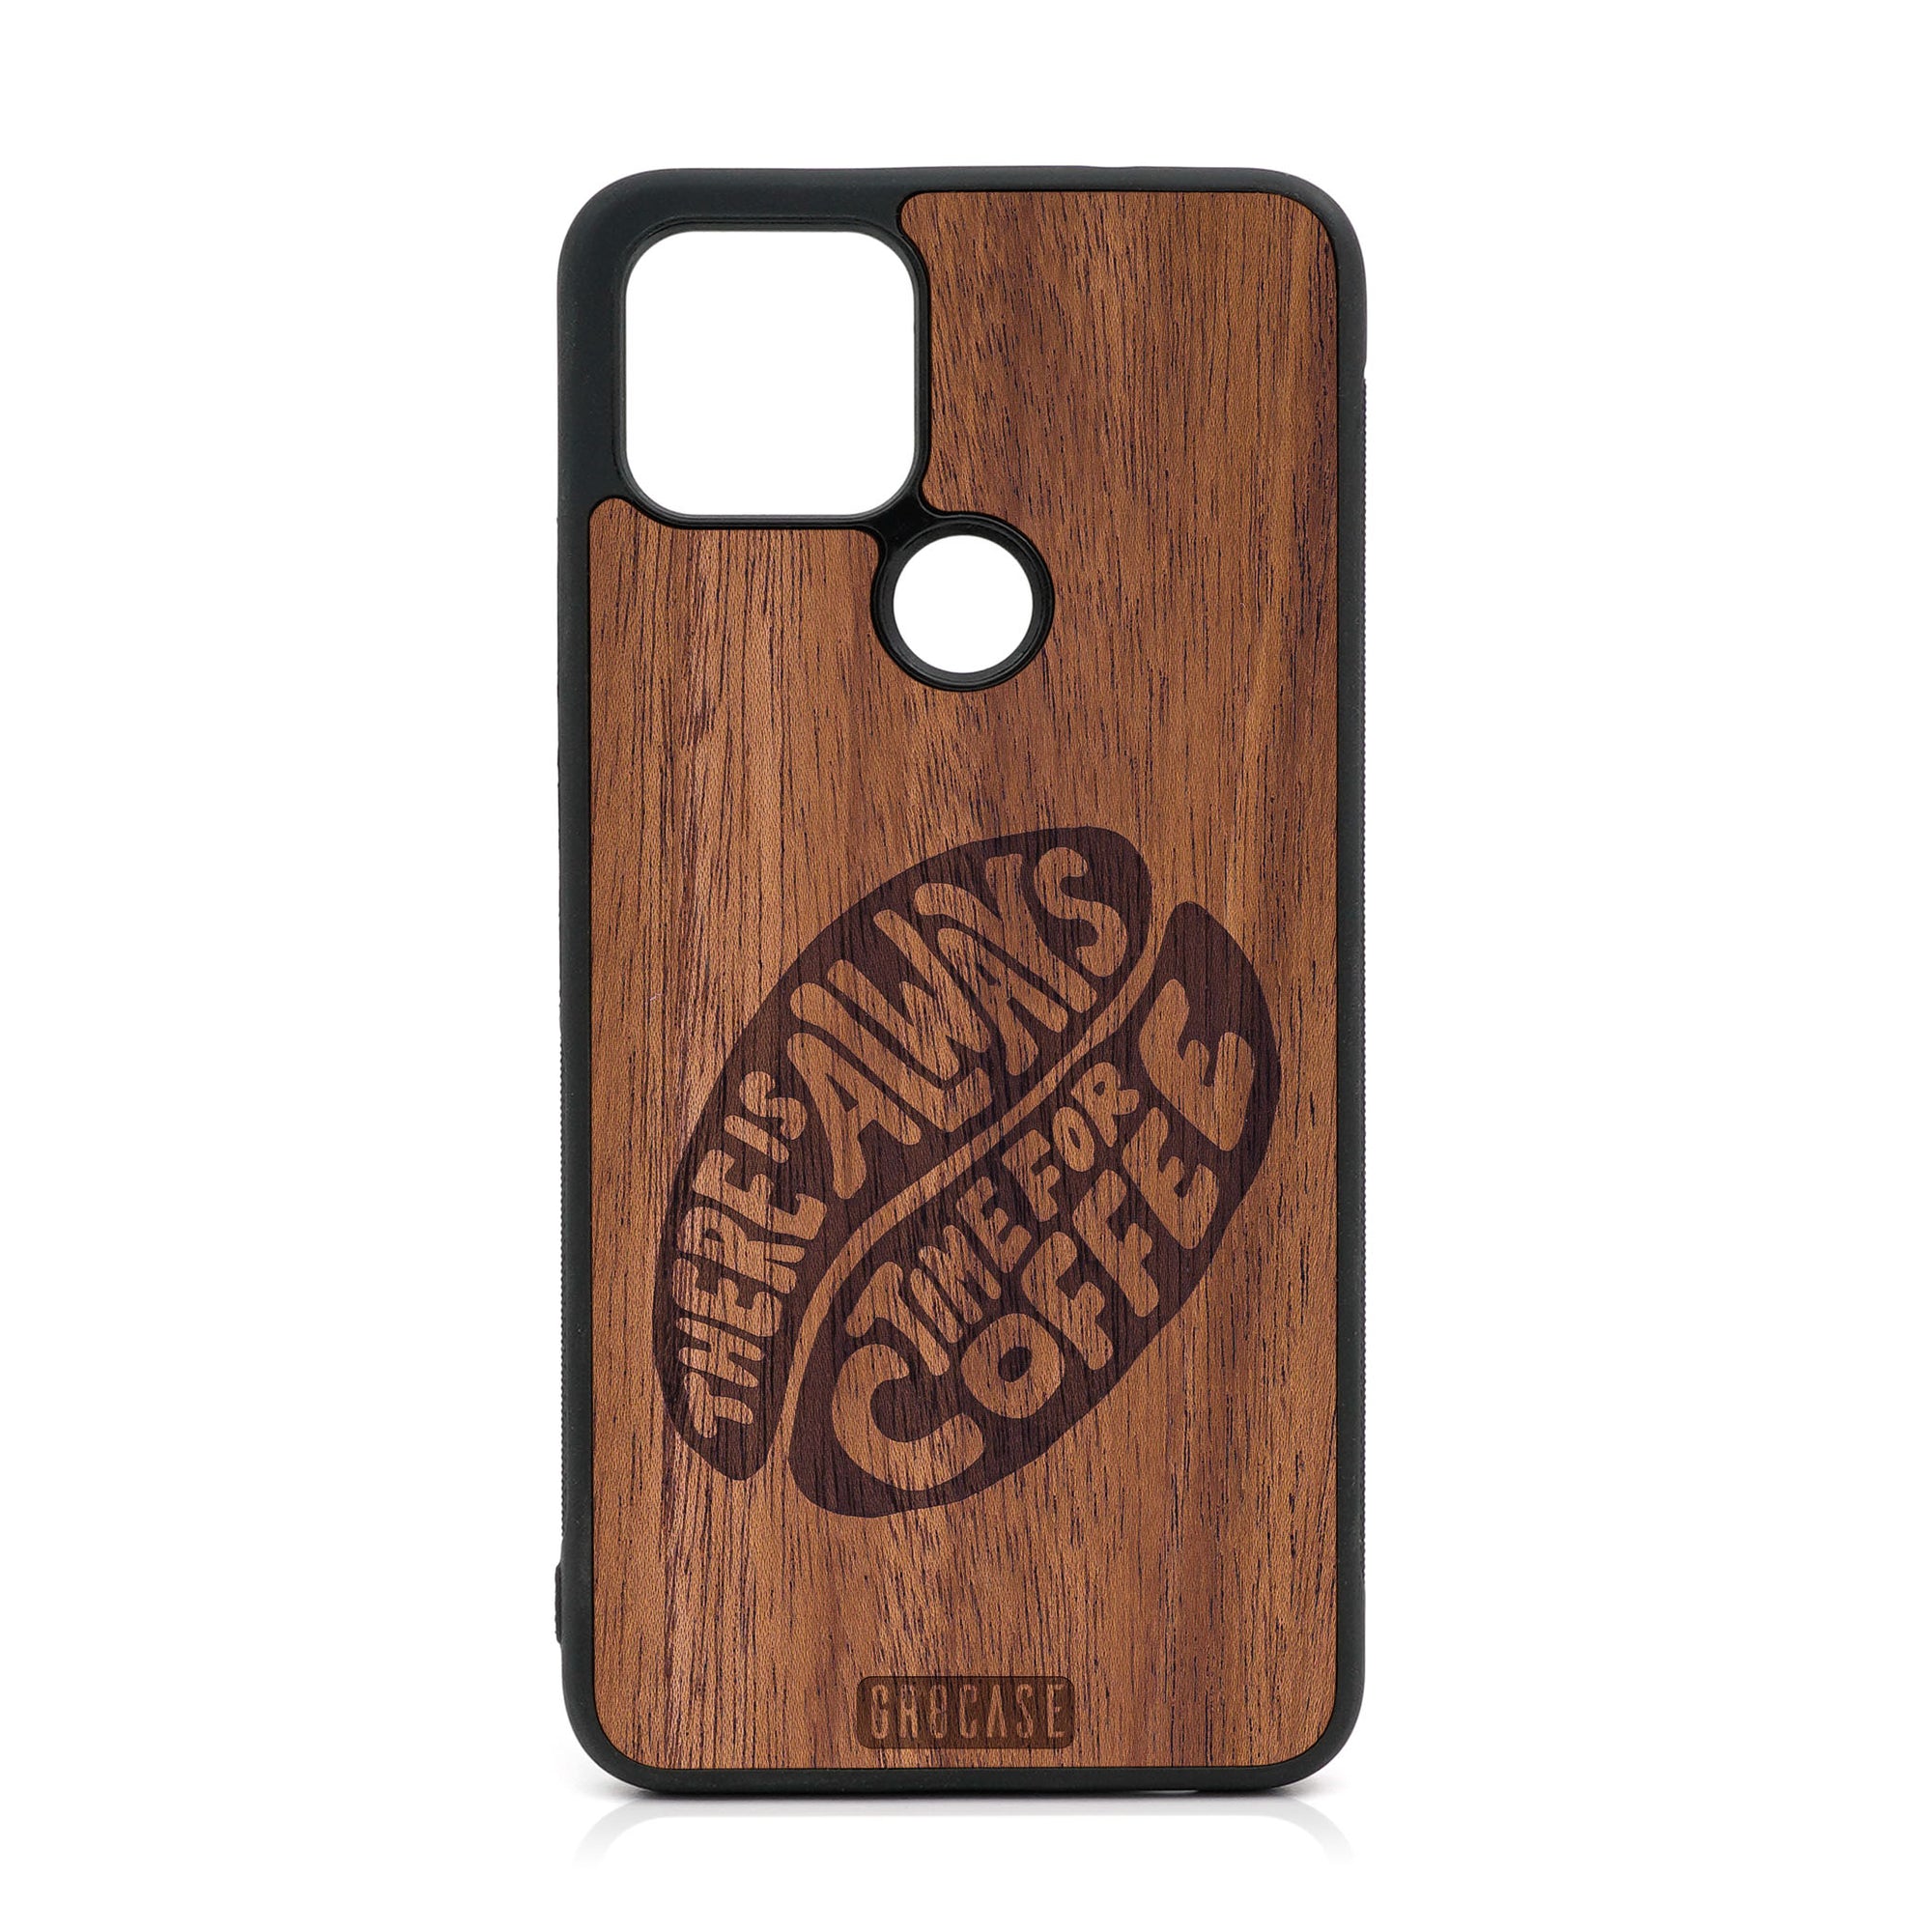 There Is Always Time For Coffee Design Wood Case For Google Pixel 5 XL/4A 5G